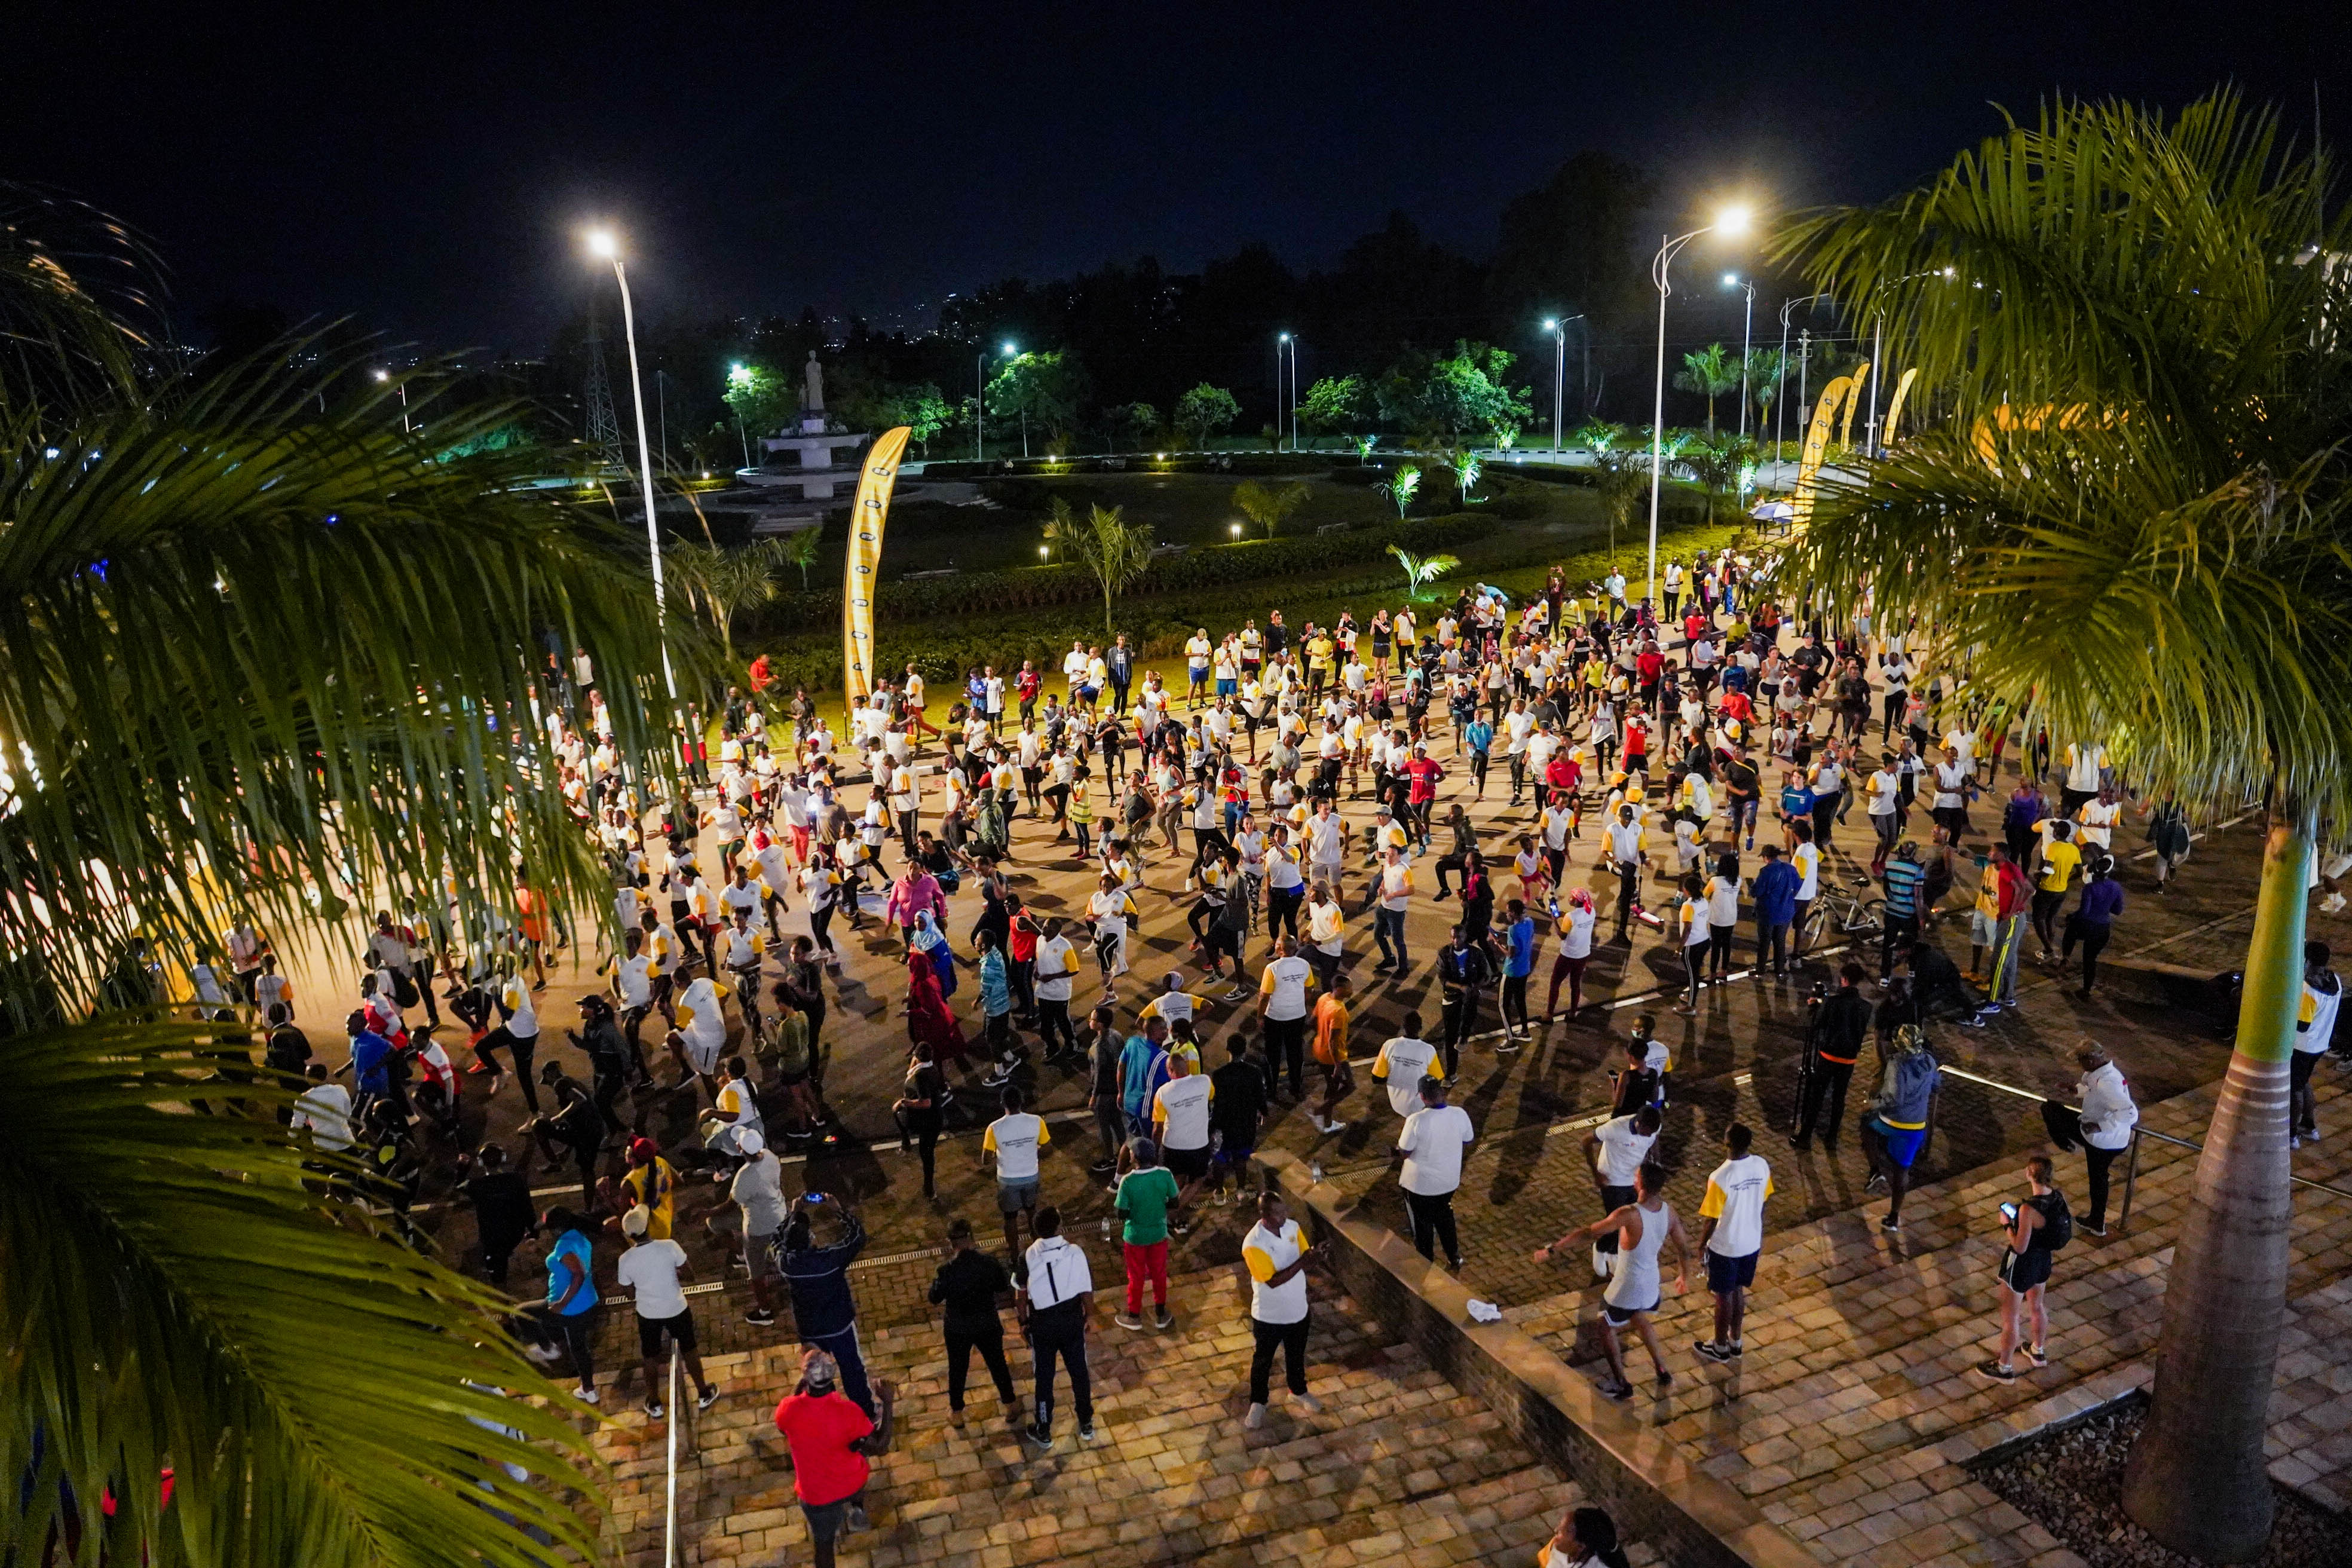 Kigali Night Run is one of the most popular public sports events in Rwanda. Photo: File.